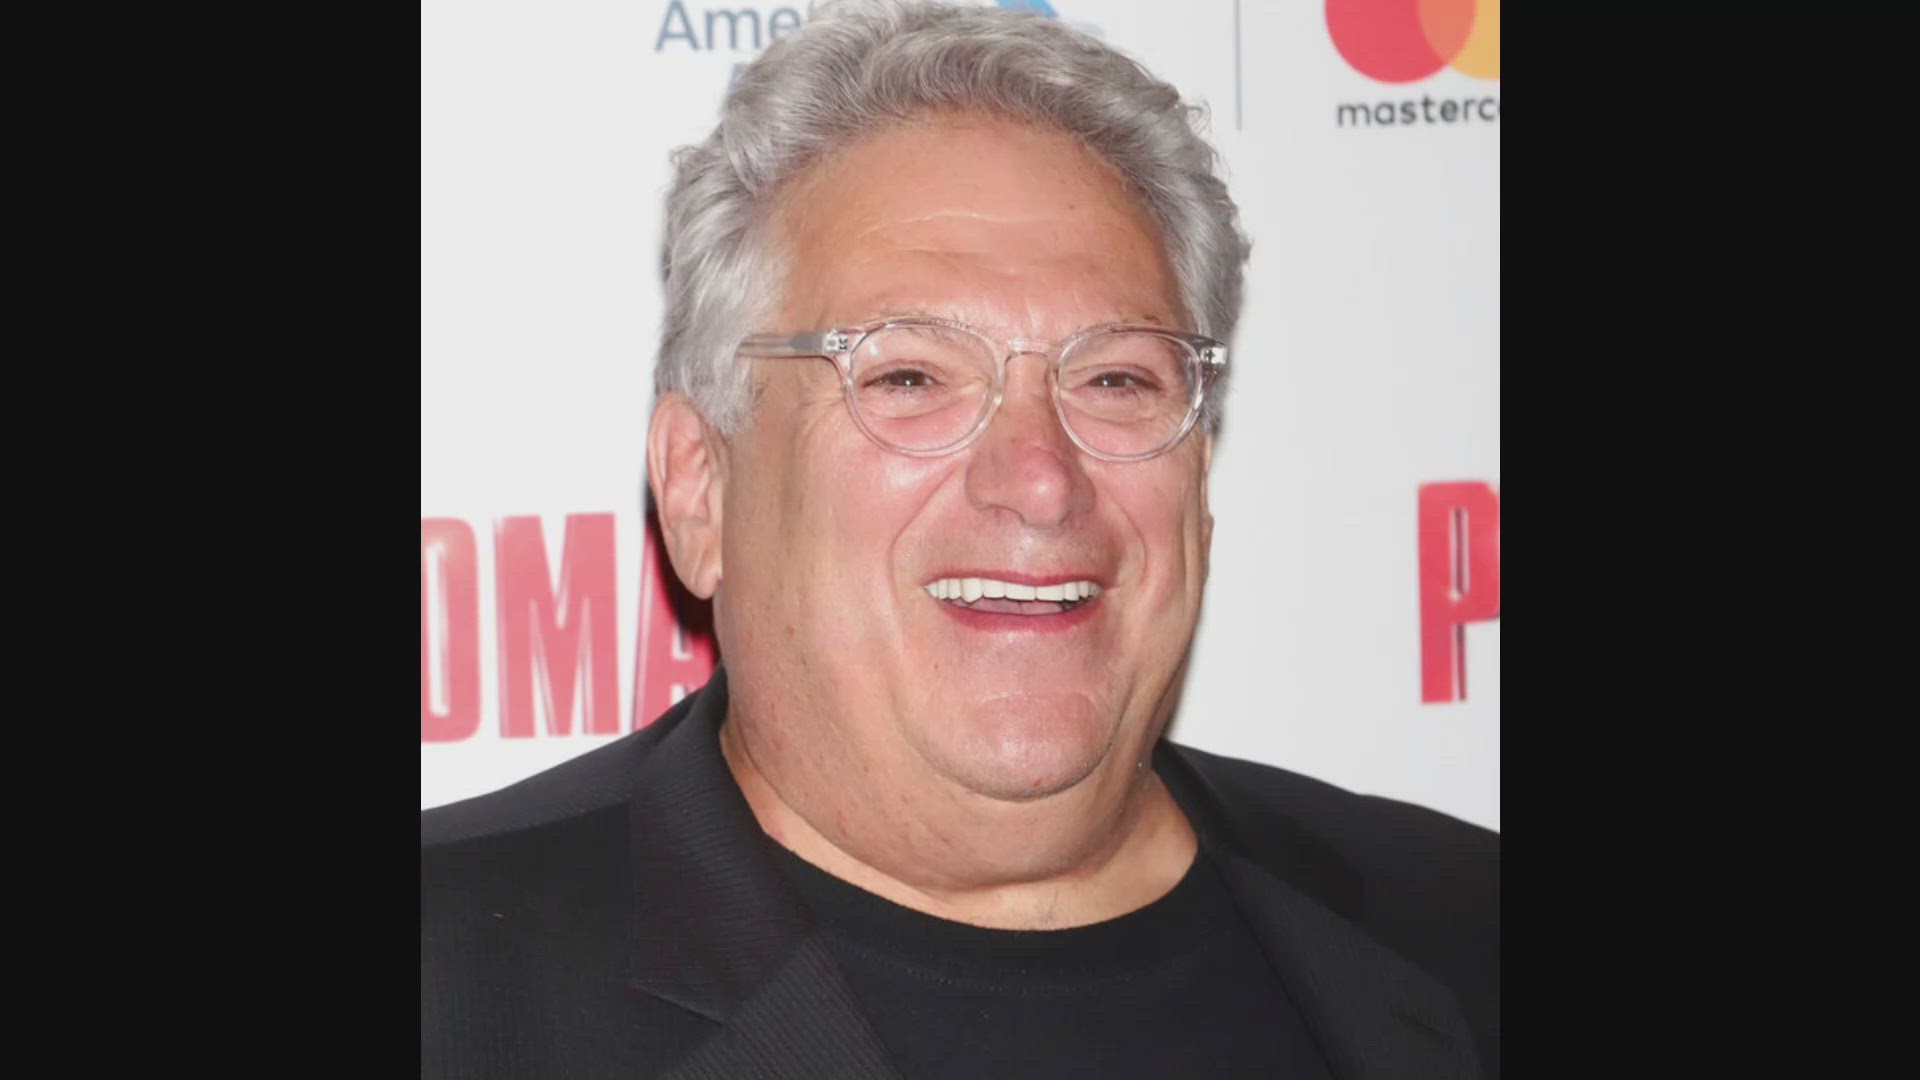 Fierstein is well known for his roles in movies like "Independence Day" and voicing characters in "Mulan" and "The Simpsons."